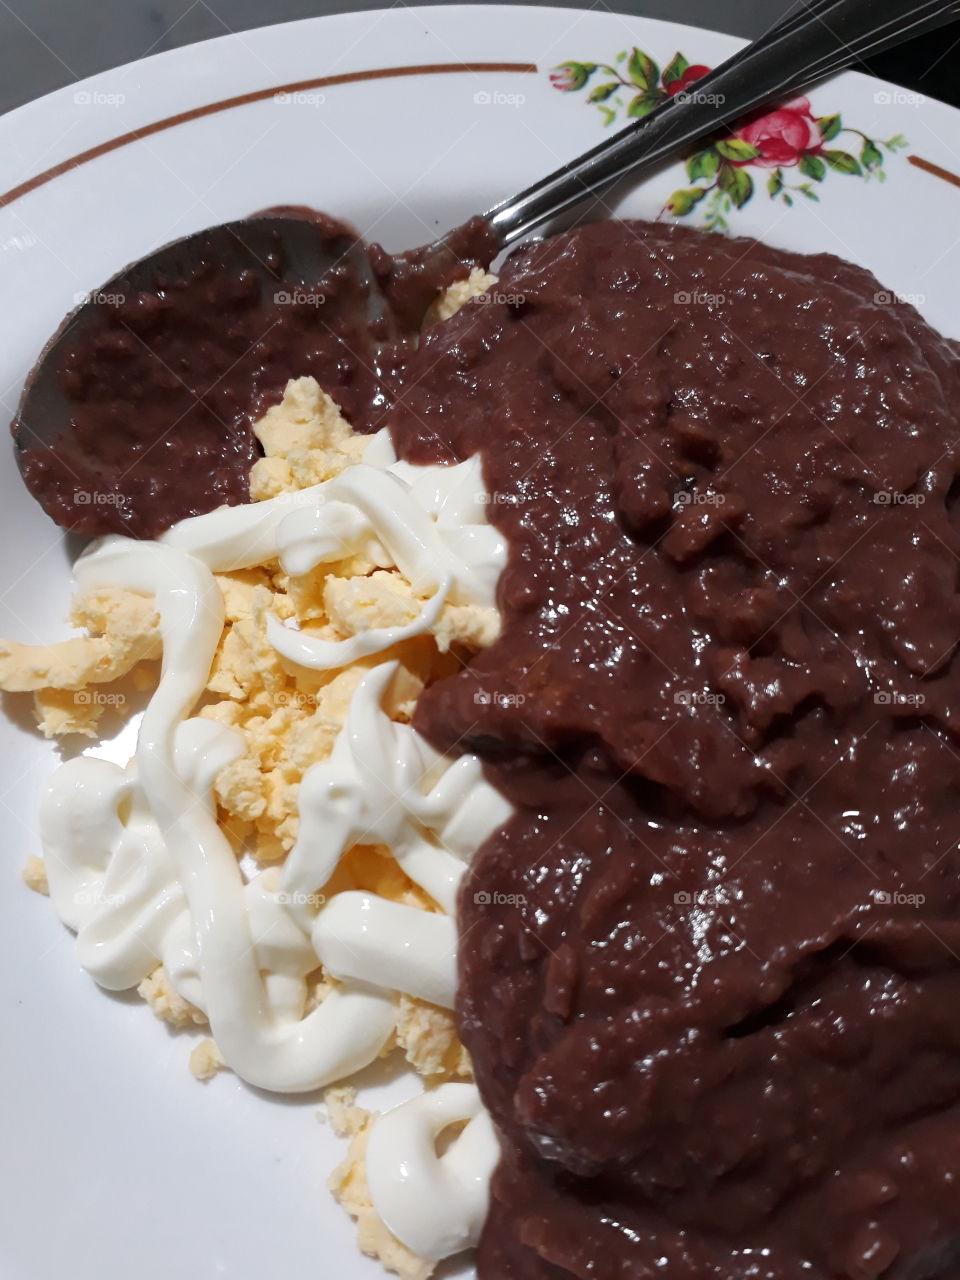 refried beans, cream and cheese for dinner